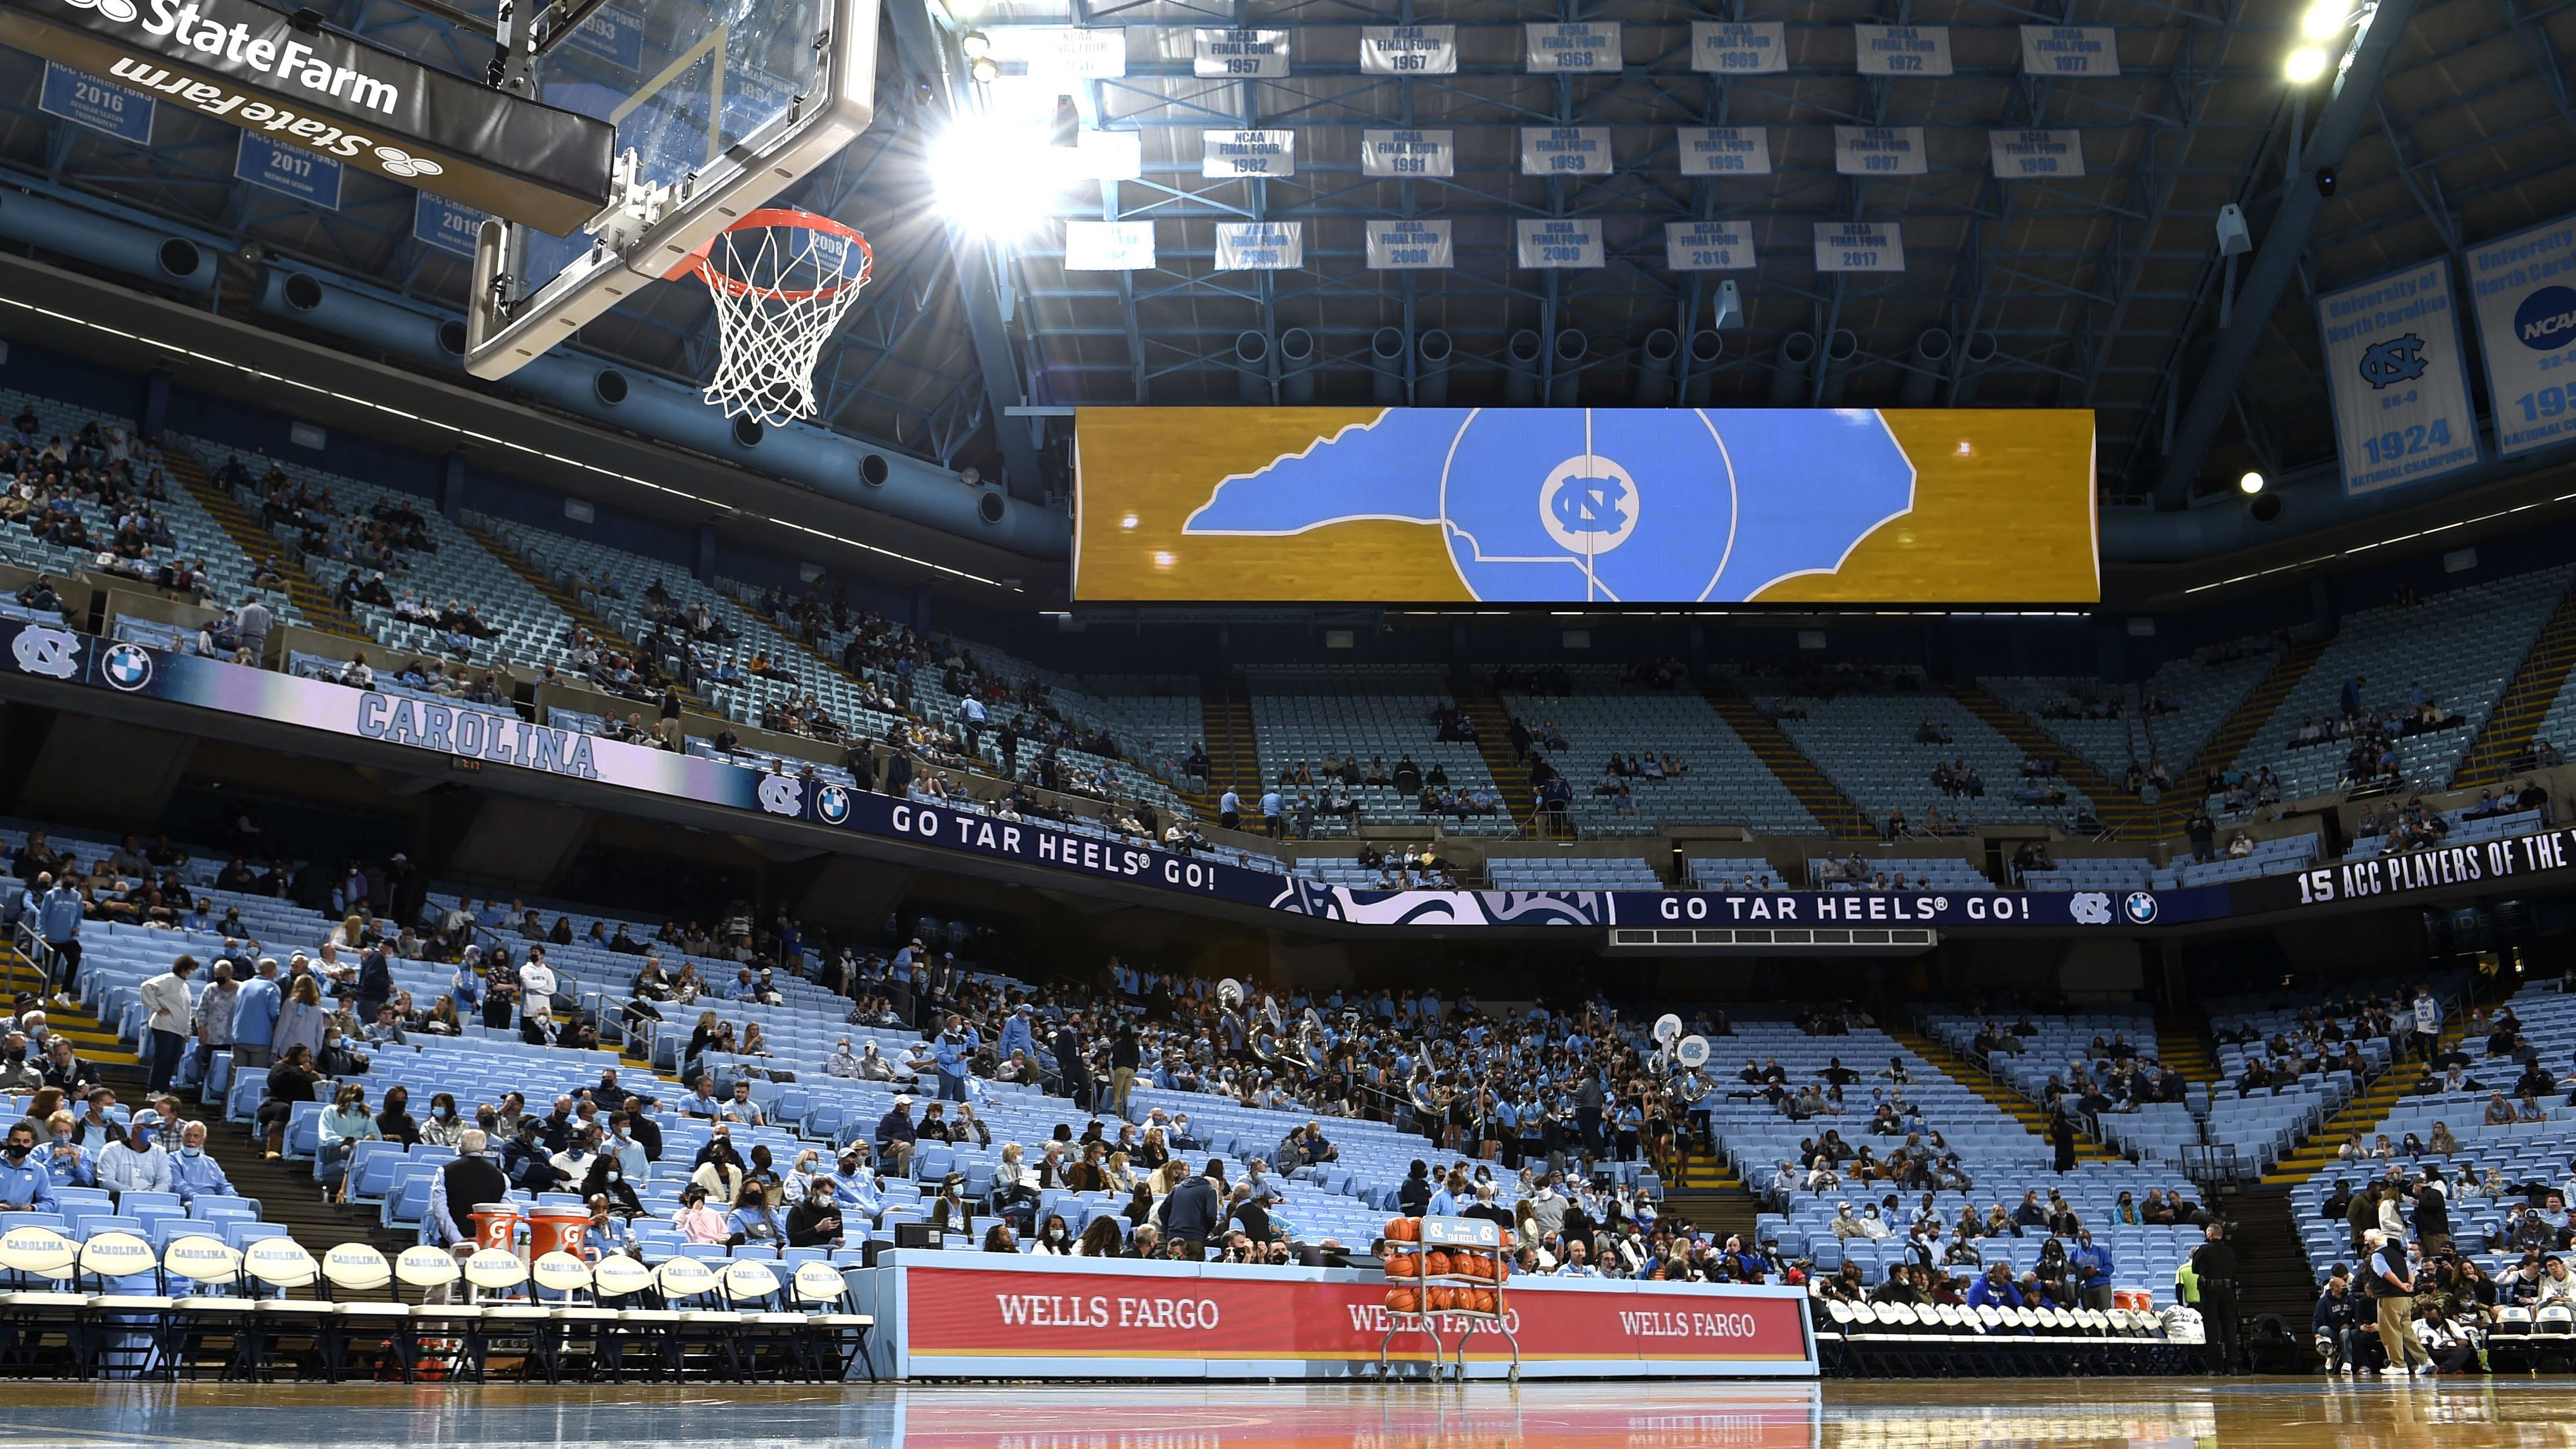 Inbound UNC Basketball Player Heading to Chapel Hill Ahead of Schedule